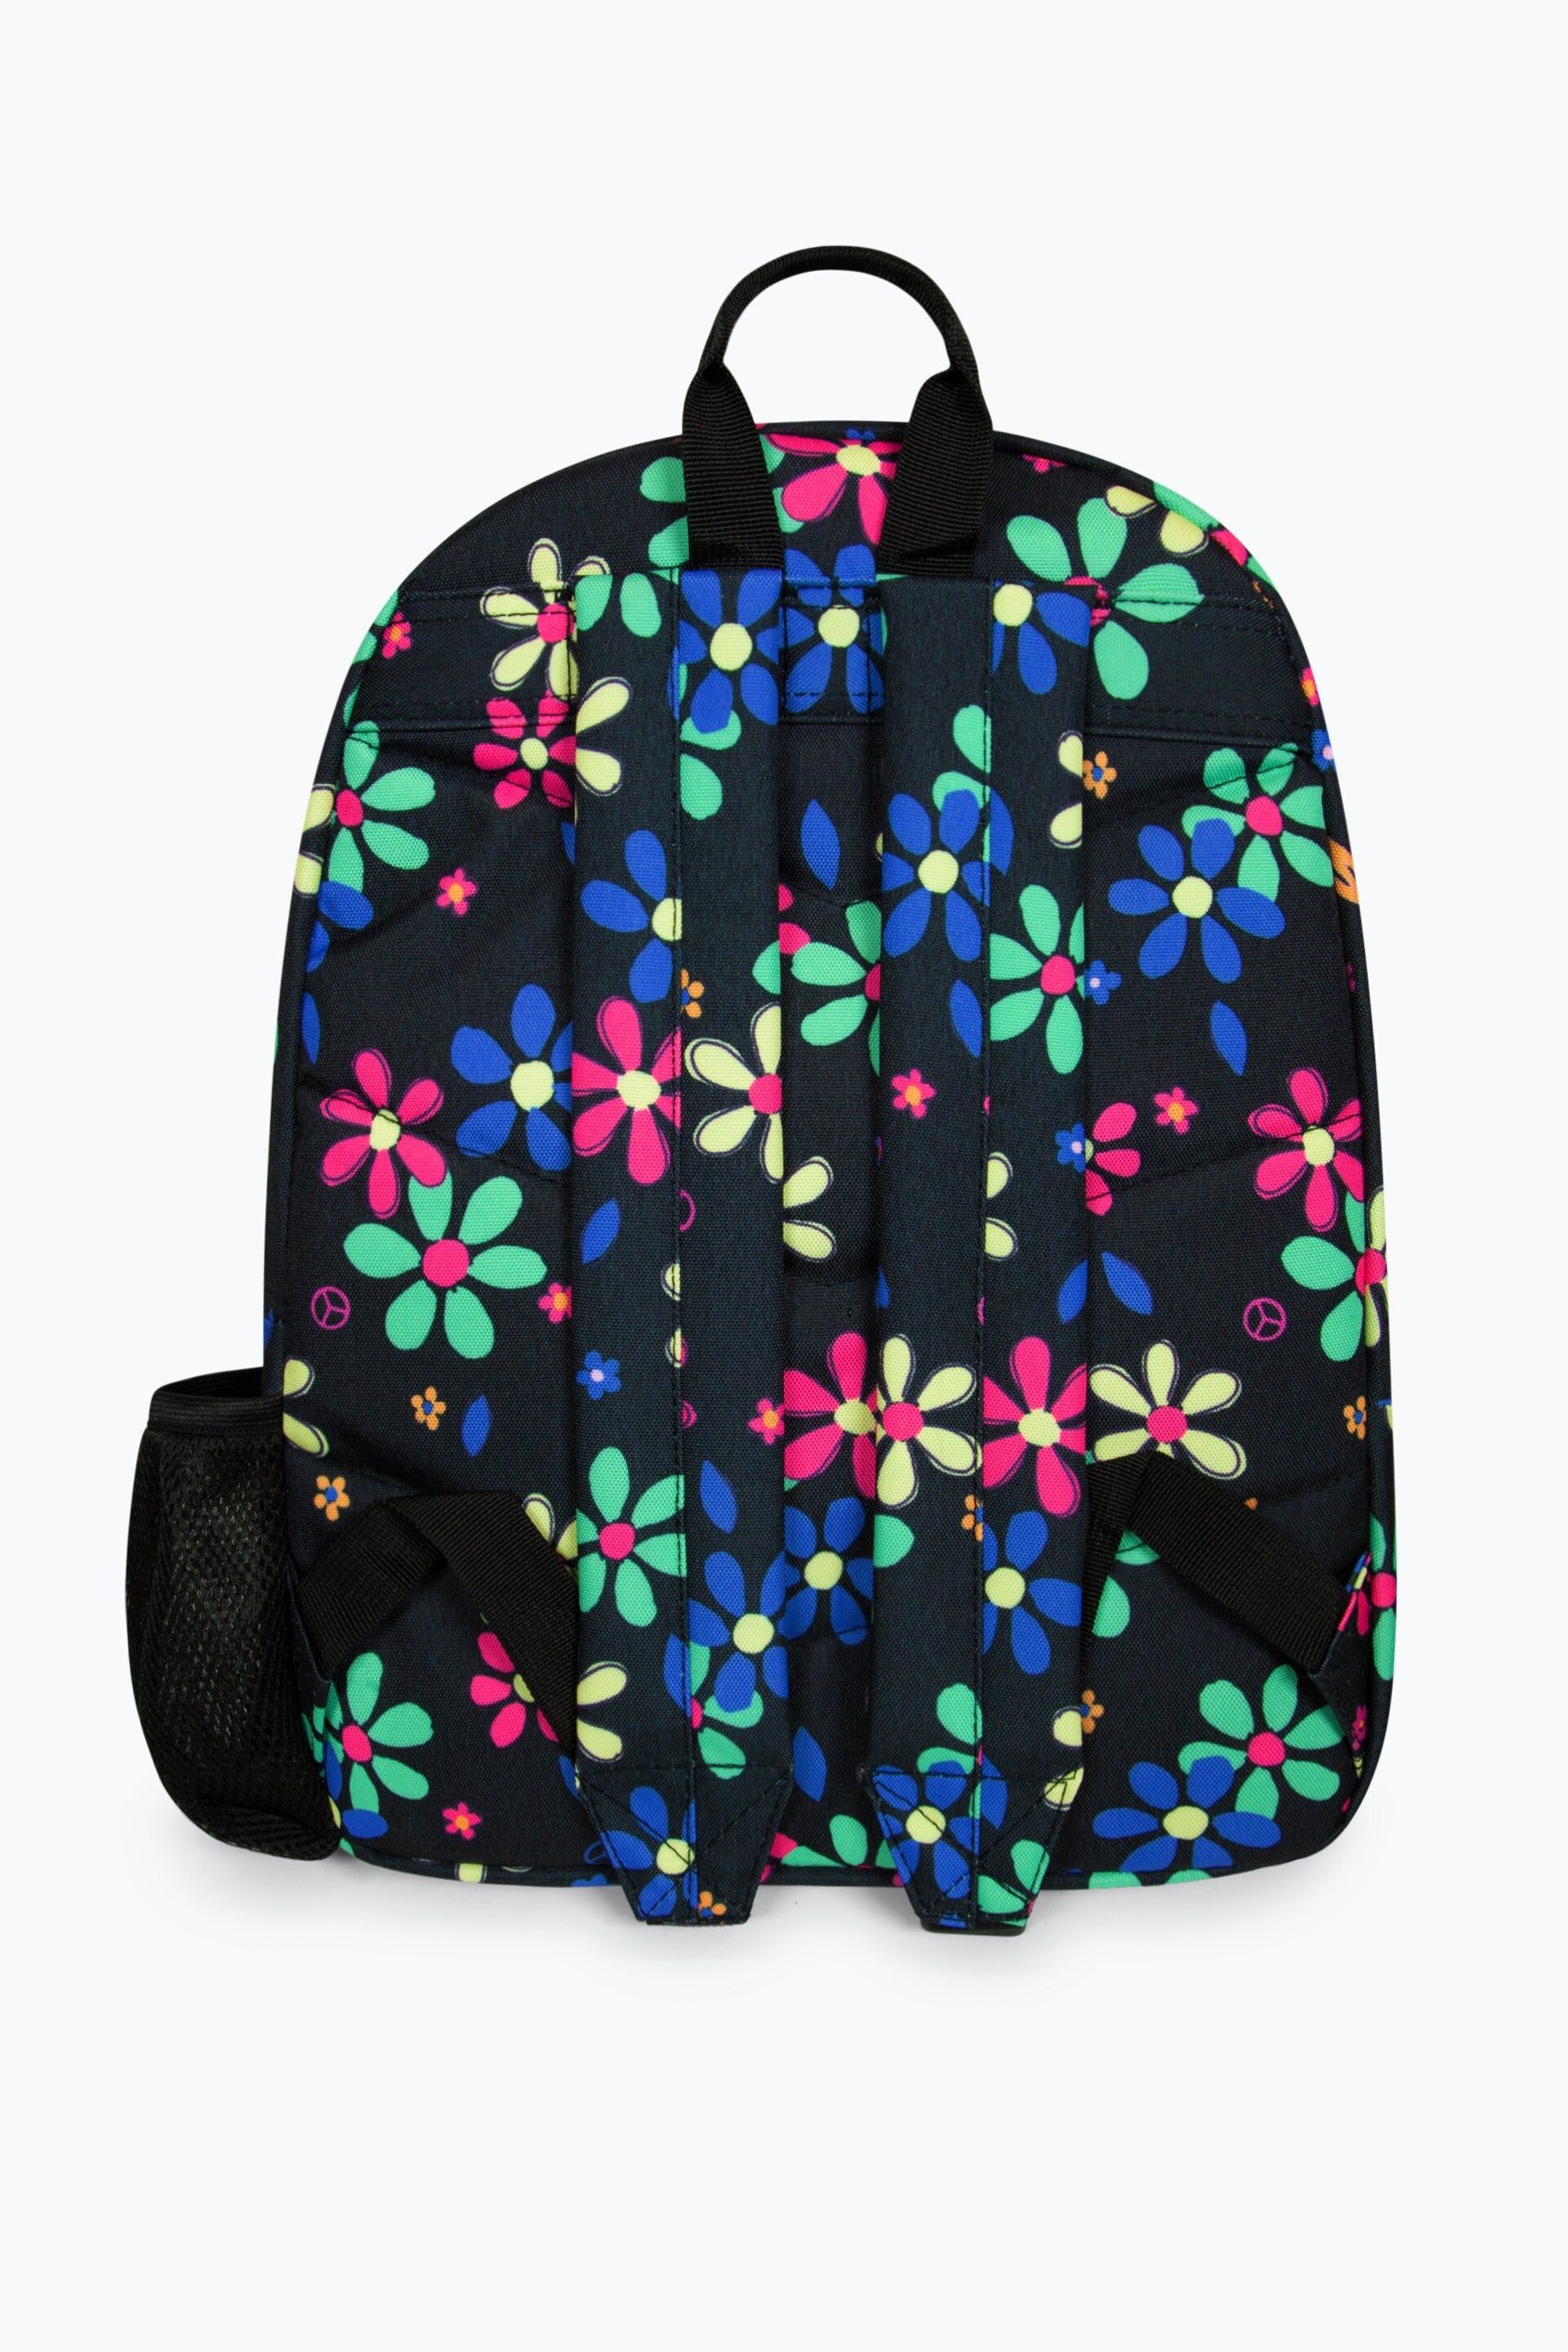 Hype. Hand Drawn Floral Backpack - Image 2 of 11